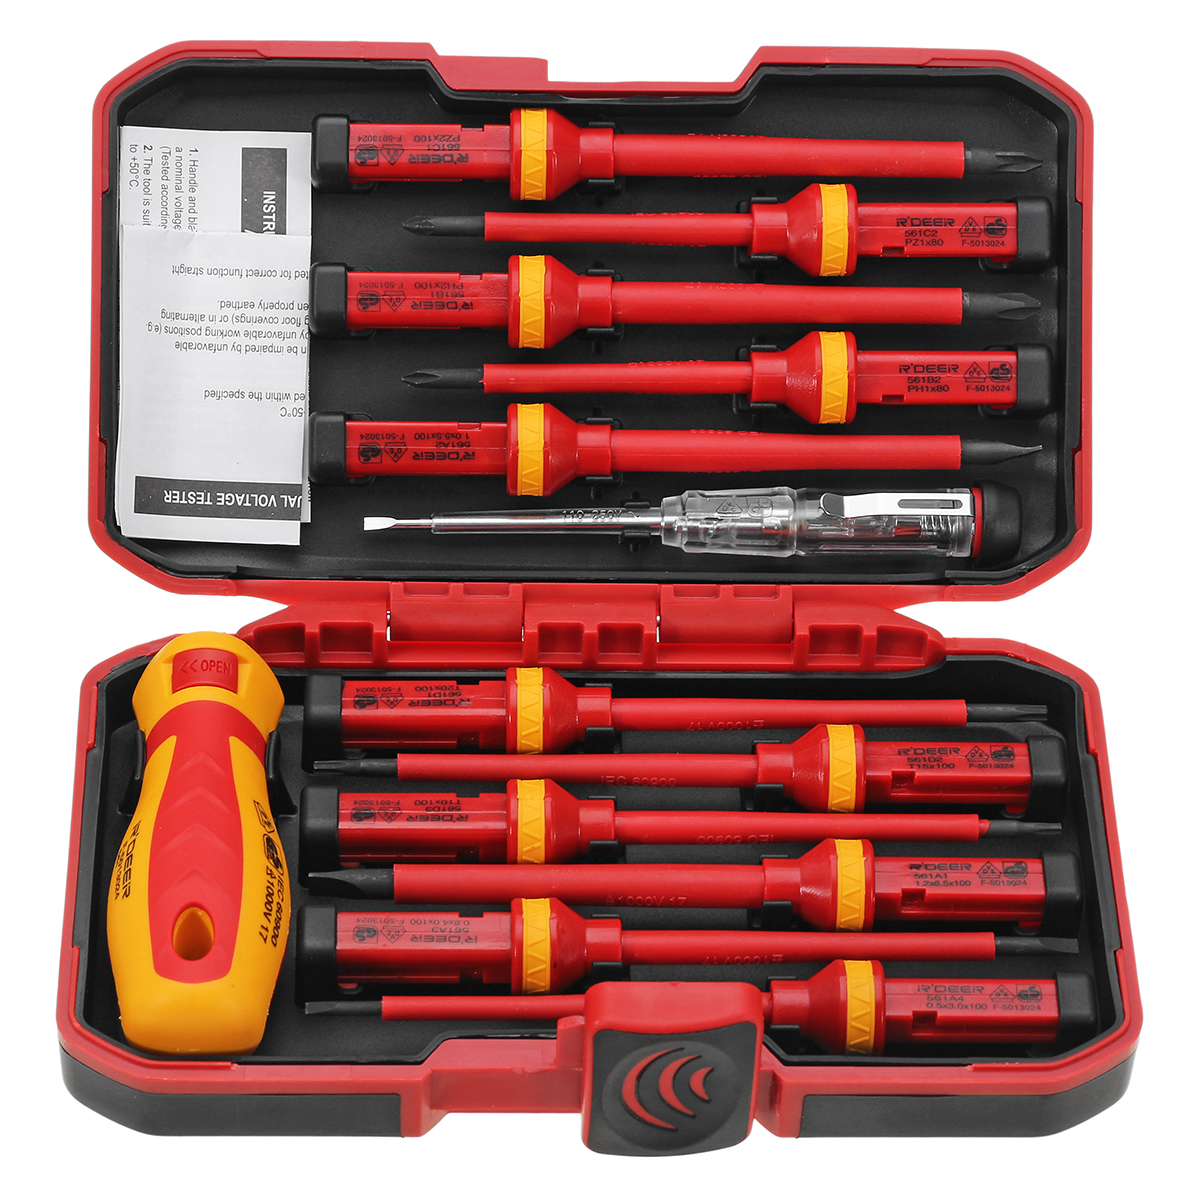 13Pcs-1000V-Electronic-Insulated-Screwdriver-Set-Phillips-Slotted-Torx-CR-V-Screwdriver-Hand-Tools-1224521-6